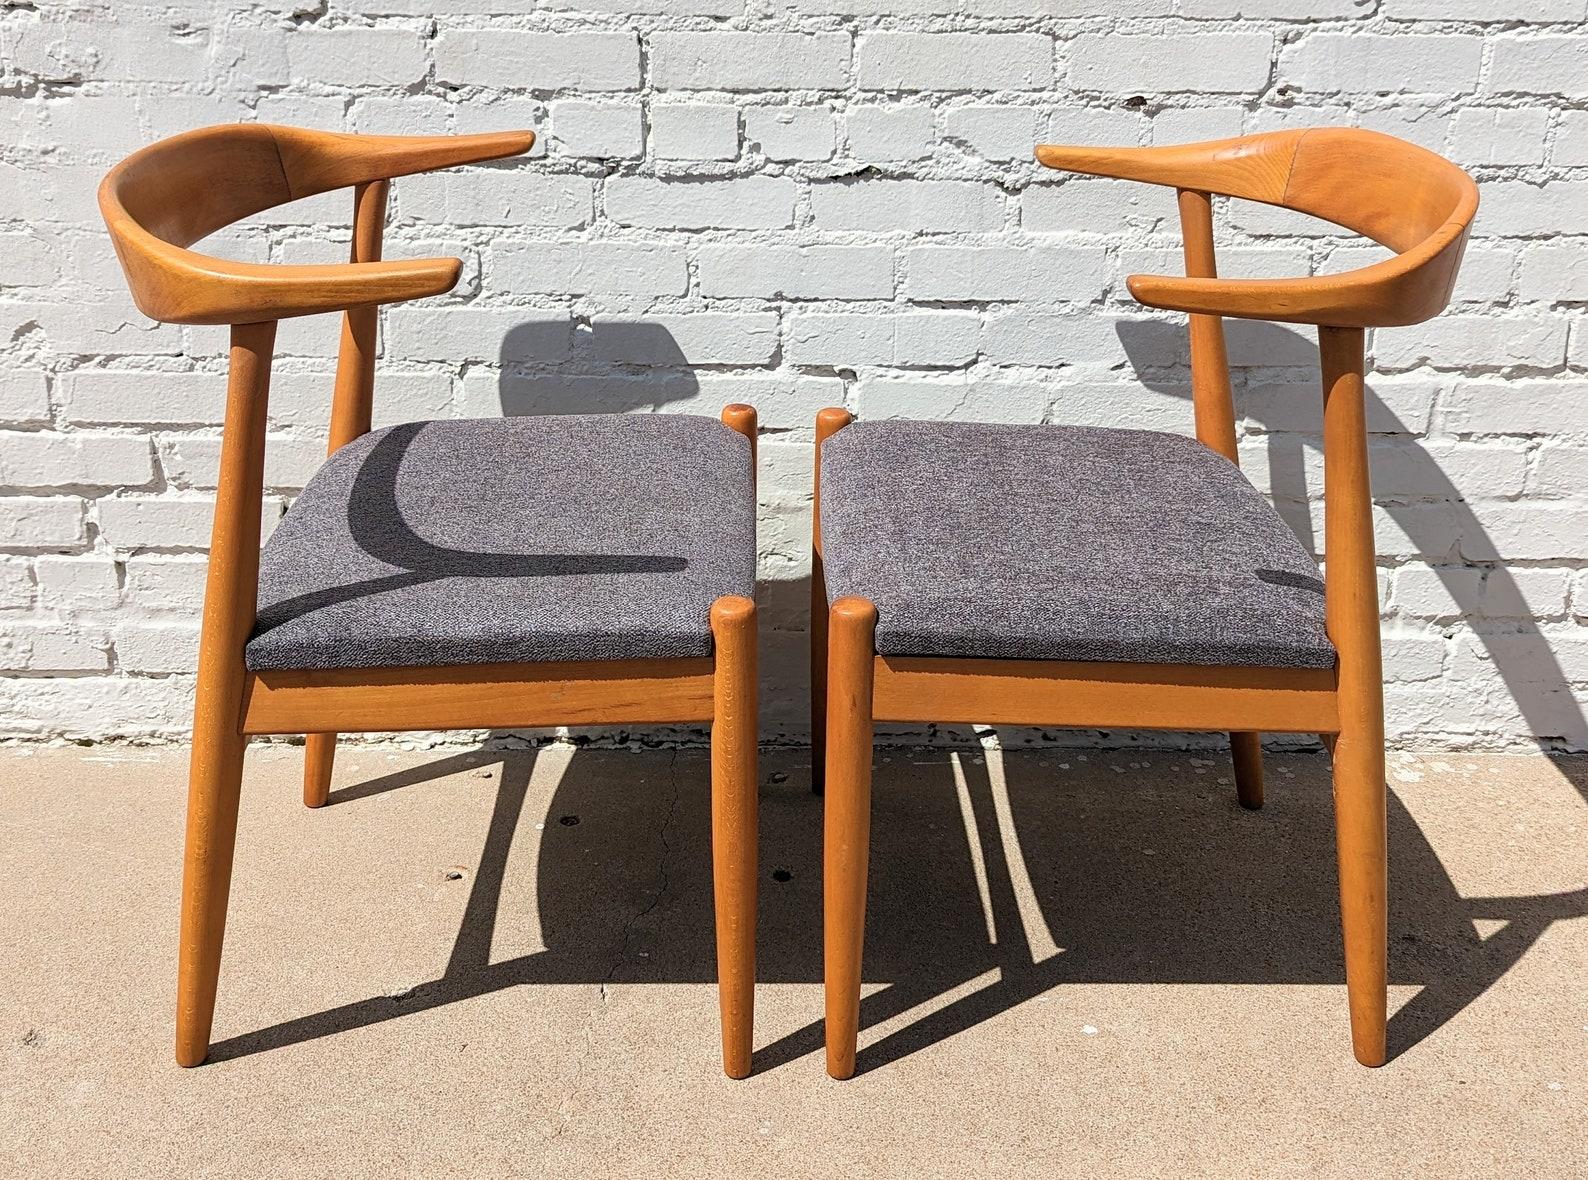 Set of 4 Mid Century Danish Modern Dining Chairs
 
Above average vintage condition and structurally sound. Has some expected slight finish wear and scratching on frames. Frames have some slight discolorations in areas. Upholstery is new. Outdoor